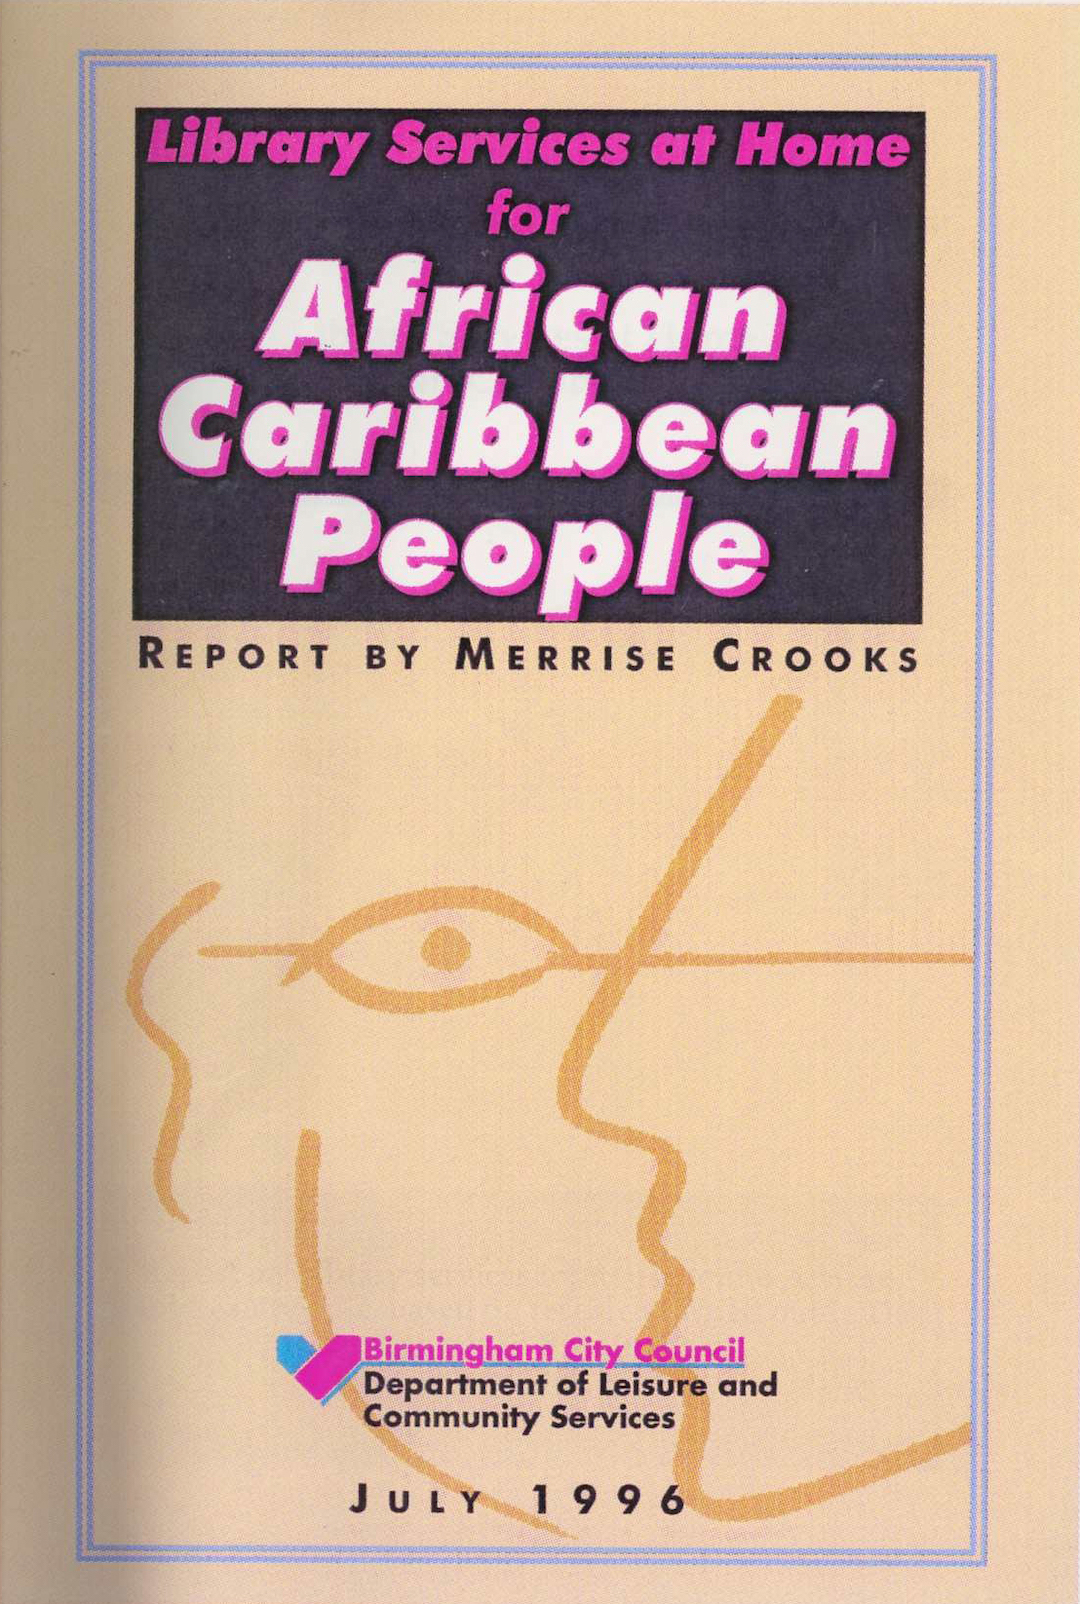 Birmingham Libraries. Library Services at Home for African Caribbean People – Report by Merrise Crooks, published by Birmingham Libraries in July 1996.